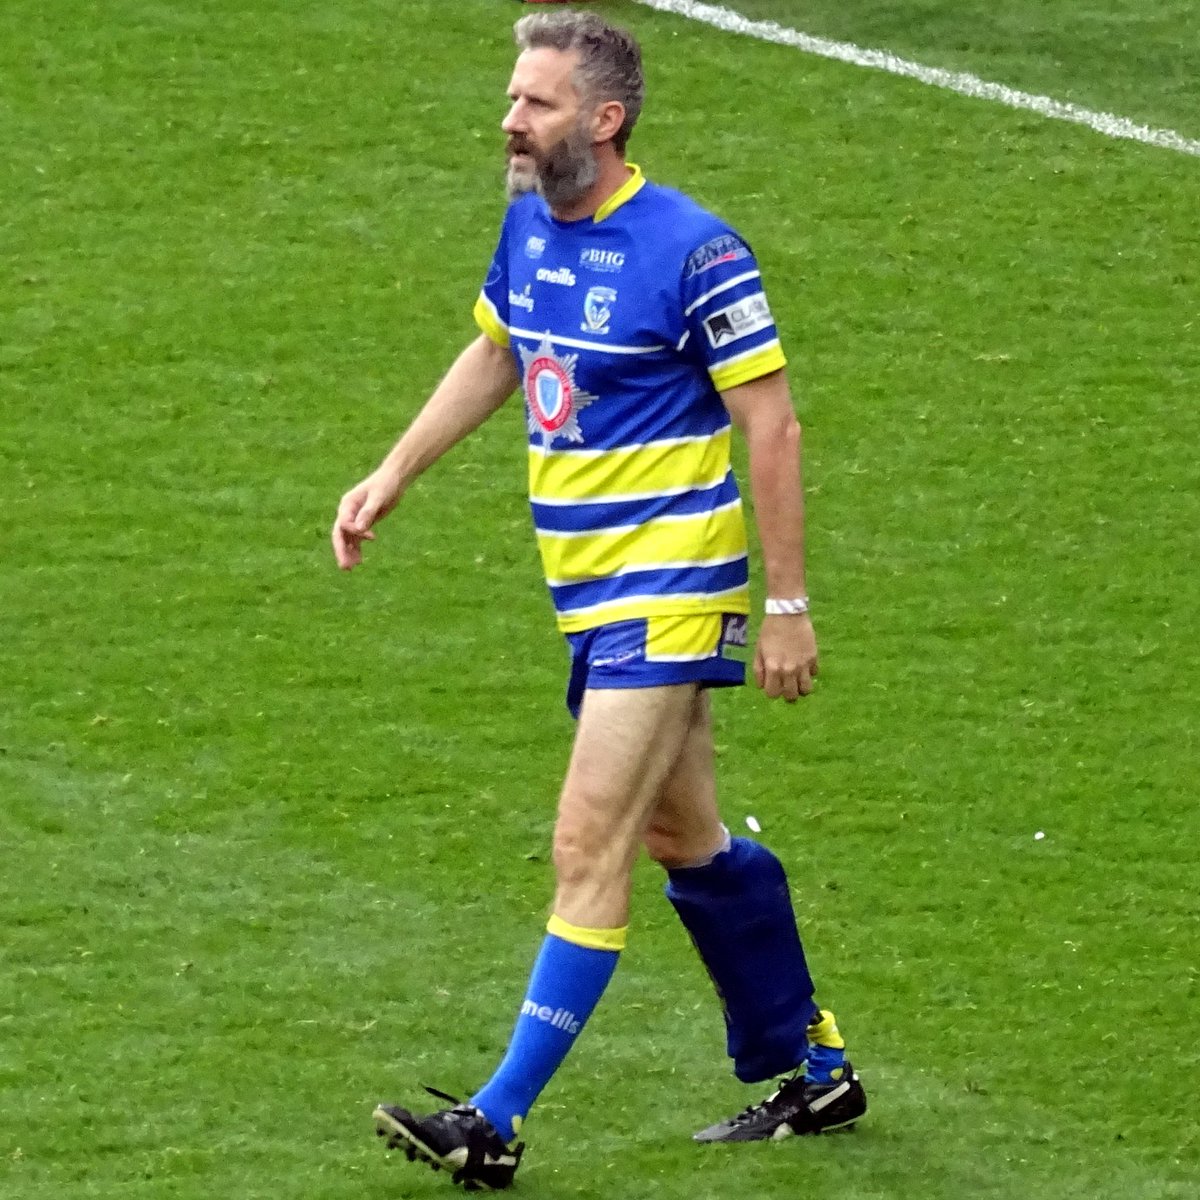 We watched #takehislegs from @adamhillscomedy last night The story of an Aussie Comedian,  Physical Disability Rugby League & a World Club Championship win, by a brave group of guys from @WarringtonRLFC

Tears of joy flowed last night. Well done  @WWCLSFoundation @adamhillscomedy